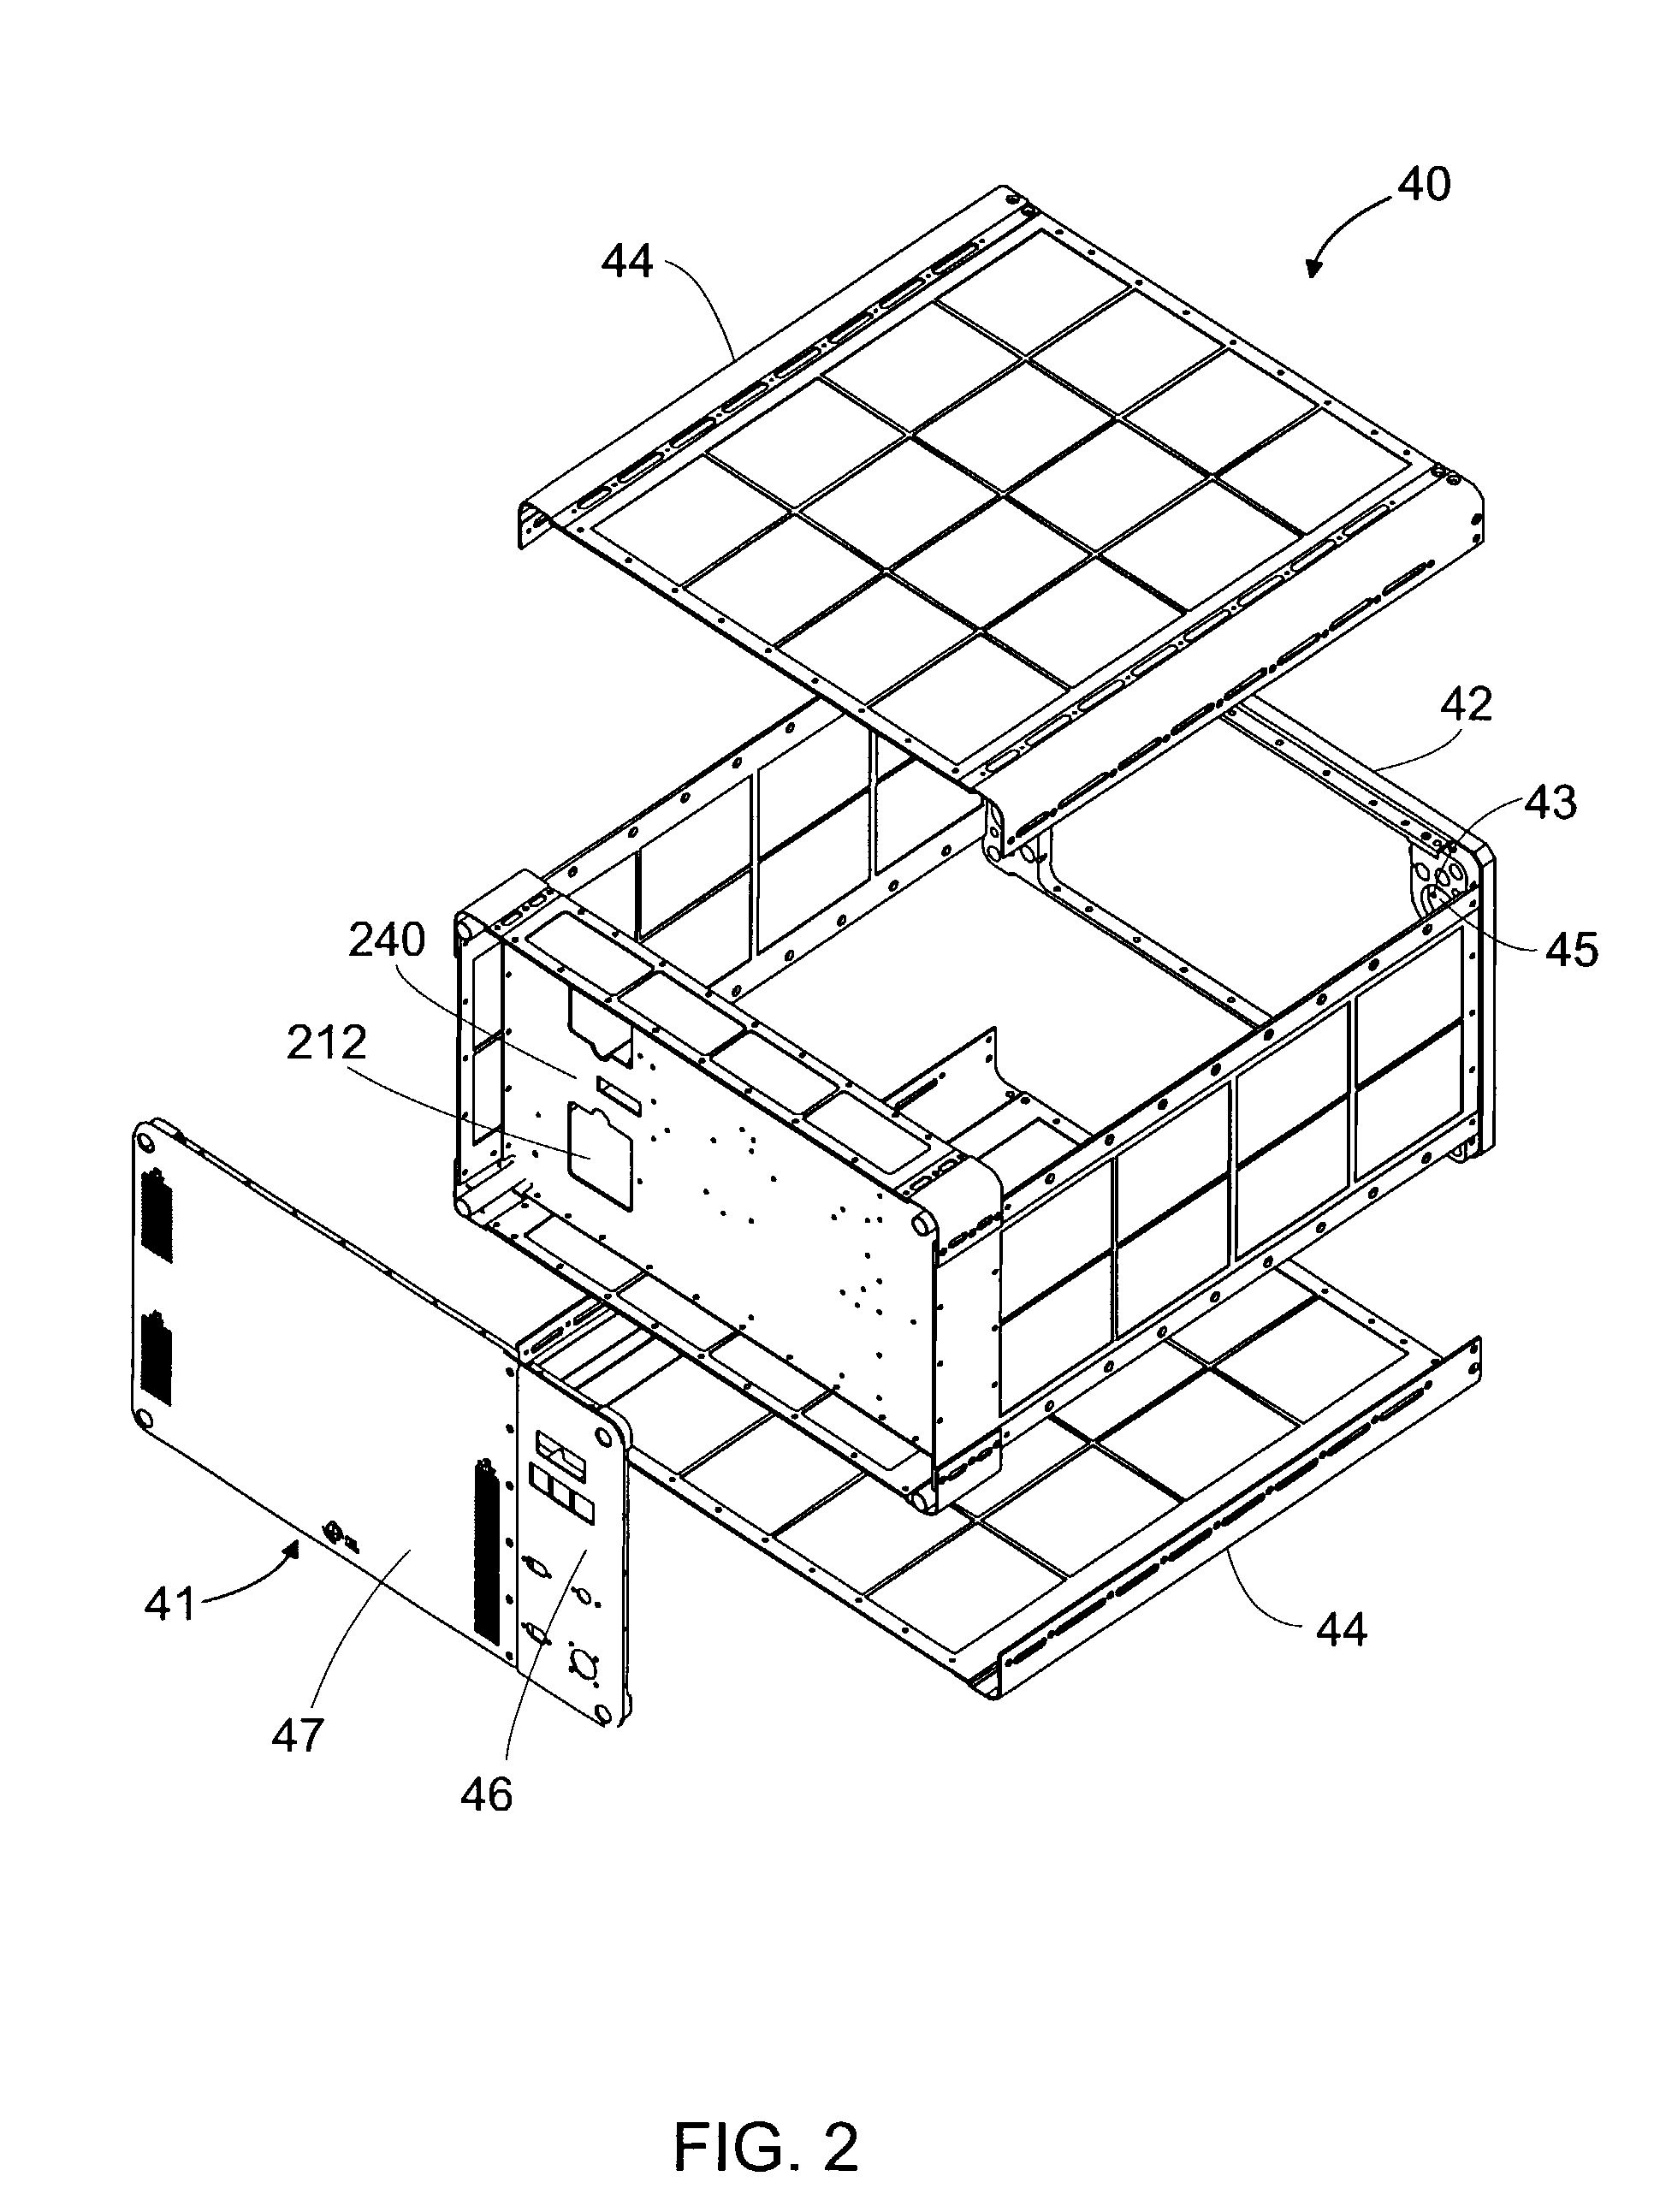 Apparatus and method for centrifugation and robotic manipulation of samples